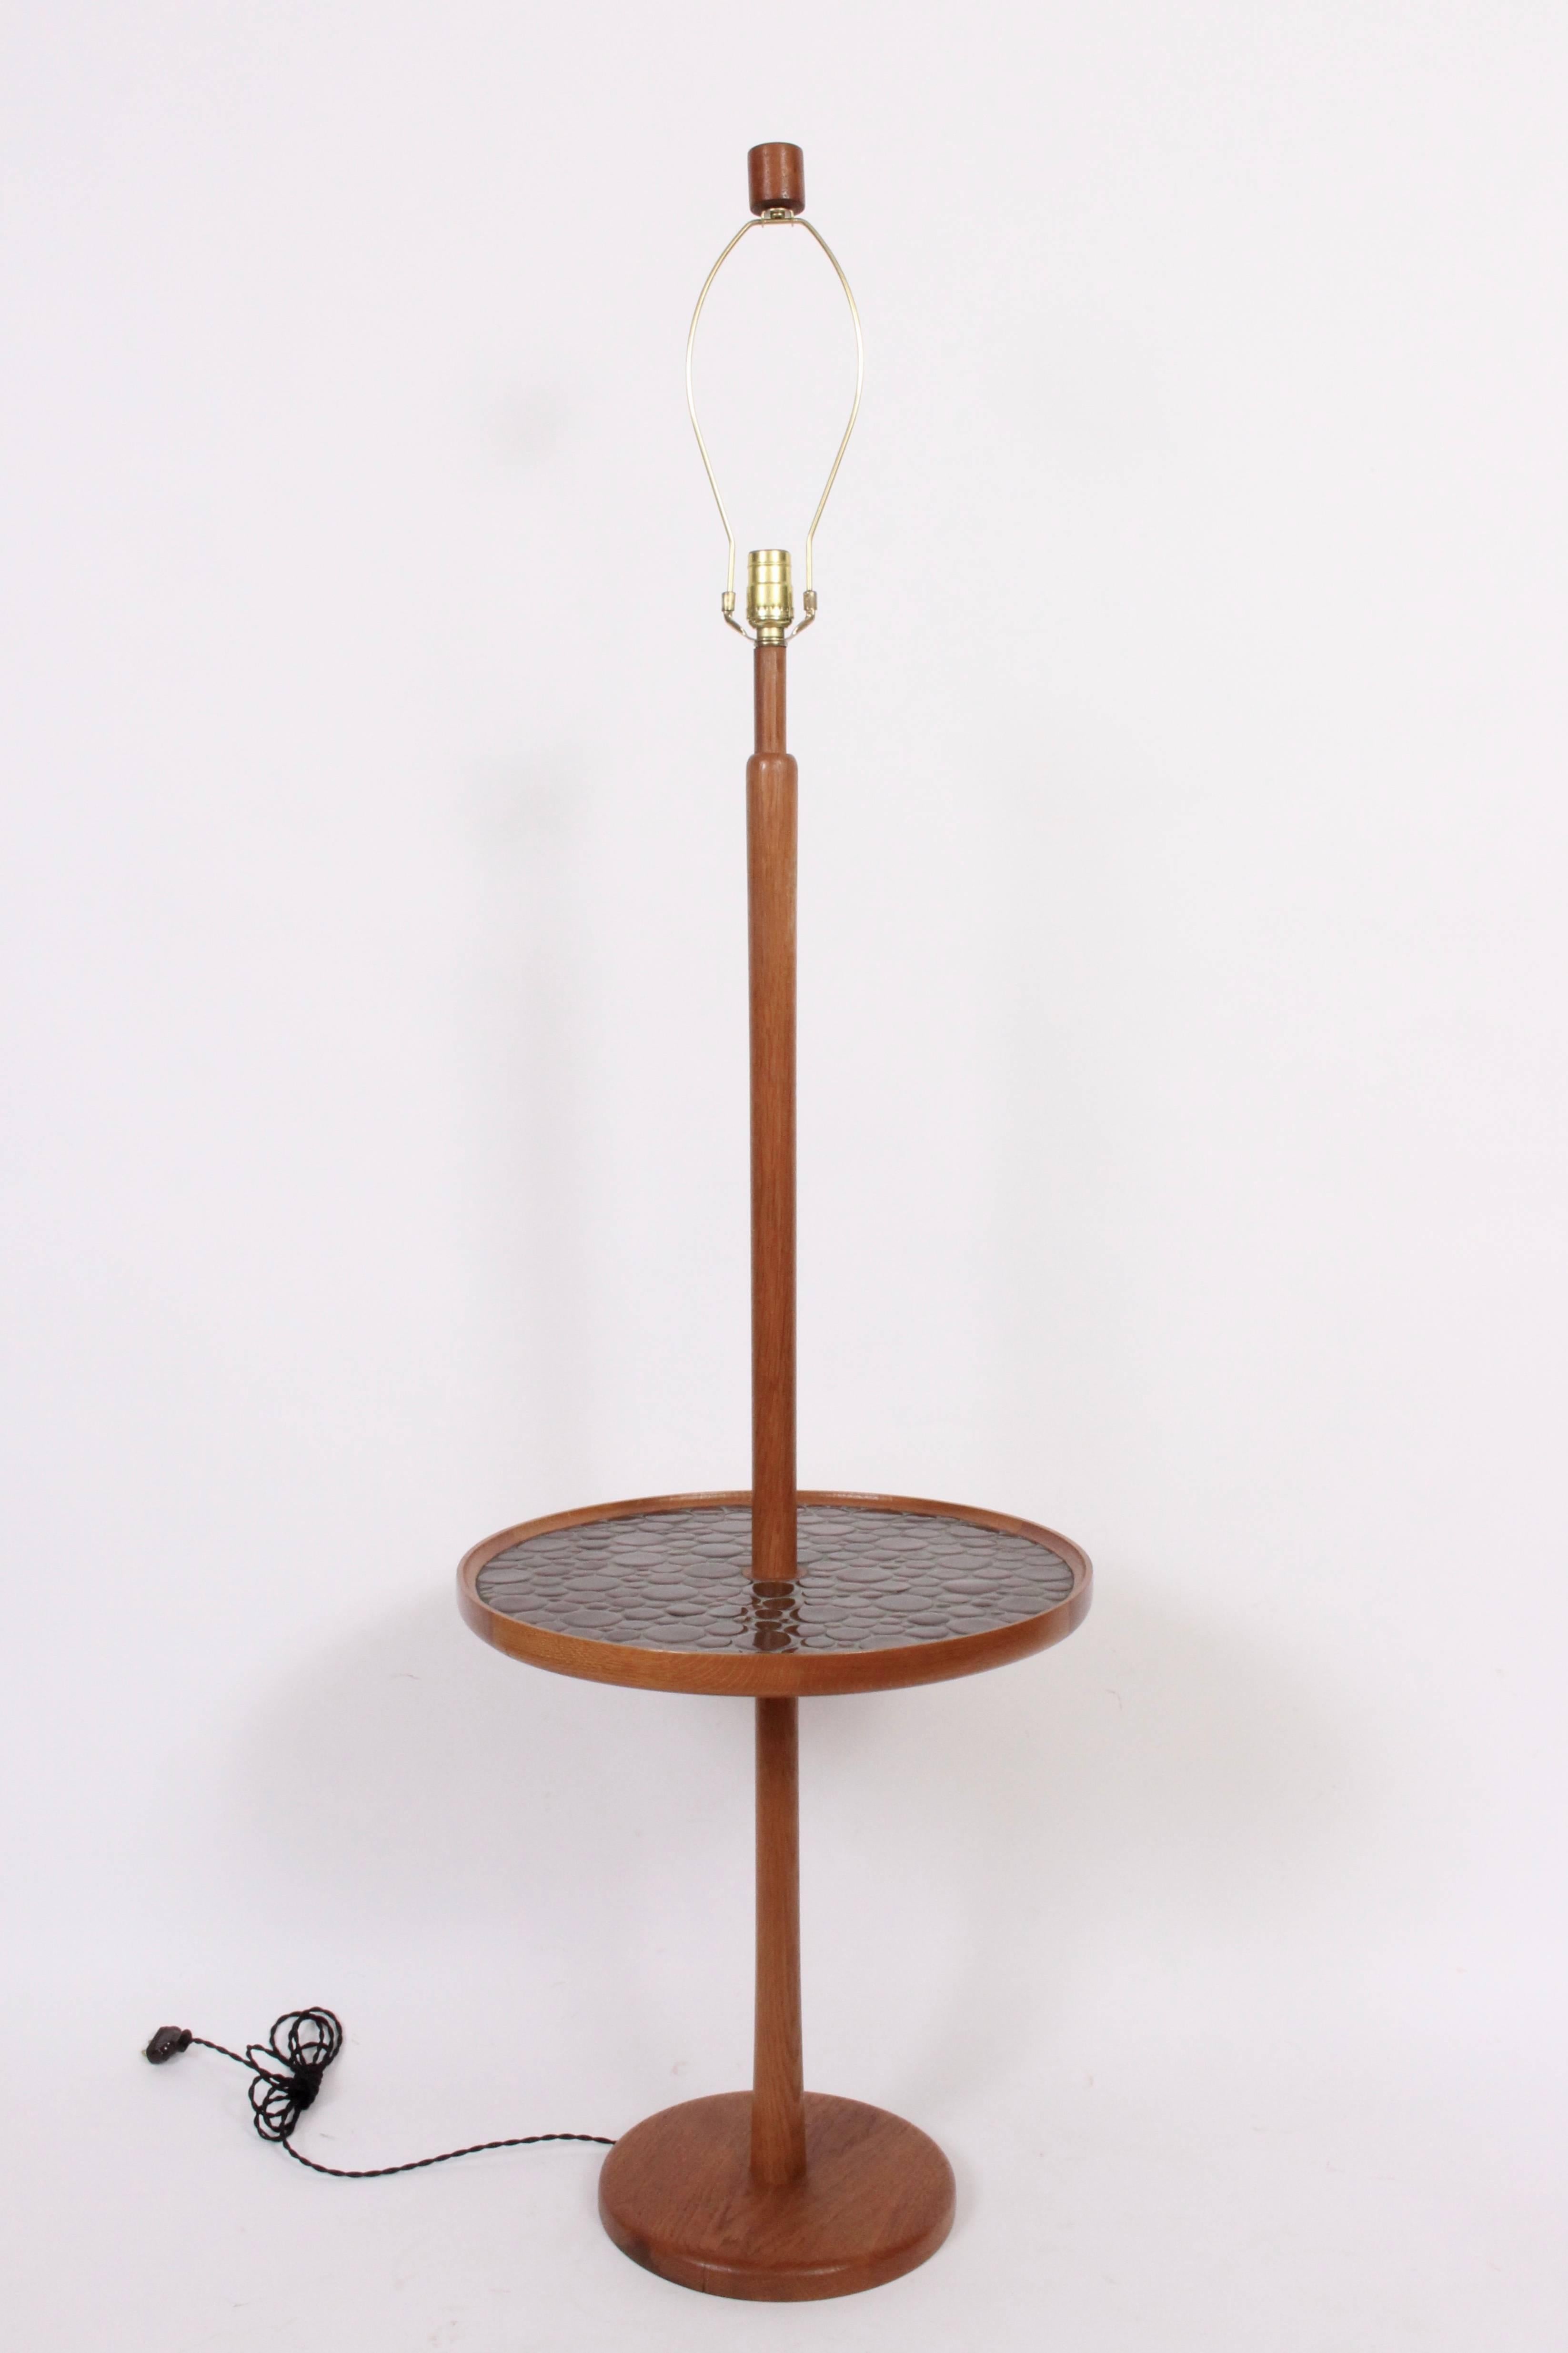 Gordon and Jane Martz for Marshall Studios W4 Reading Floor Lamp with Side Table, 1960's. Featuring a Dark Teak column, lipped surface, Deep Brown round ceramic tile surface on weighted 8 lb casting base. Shade for display only (Shade 16H x 16D top